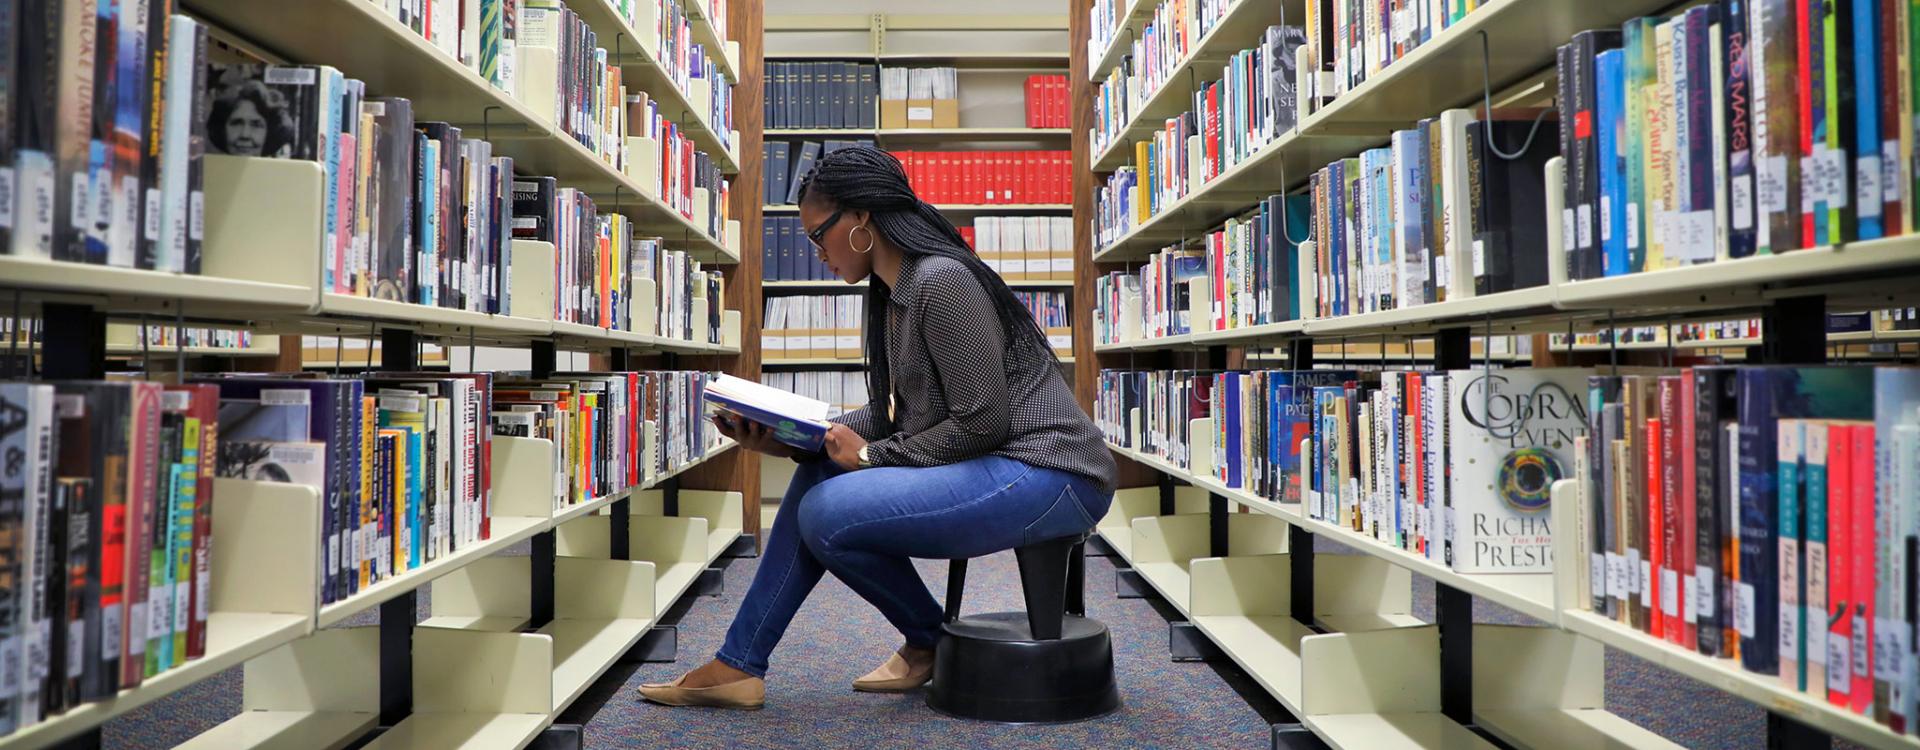 female student sitting on a step stool reading a book she just pulled from the library shelf